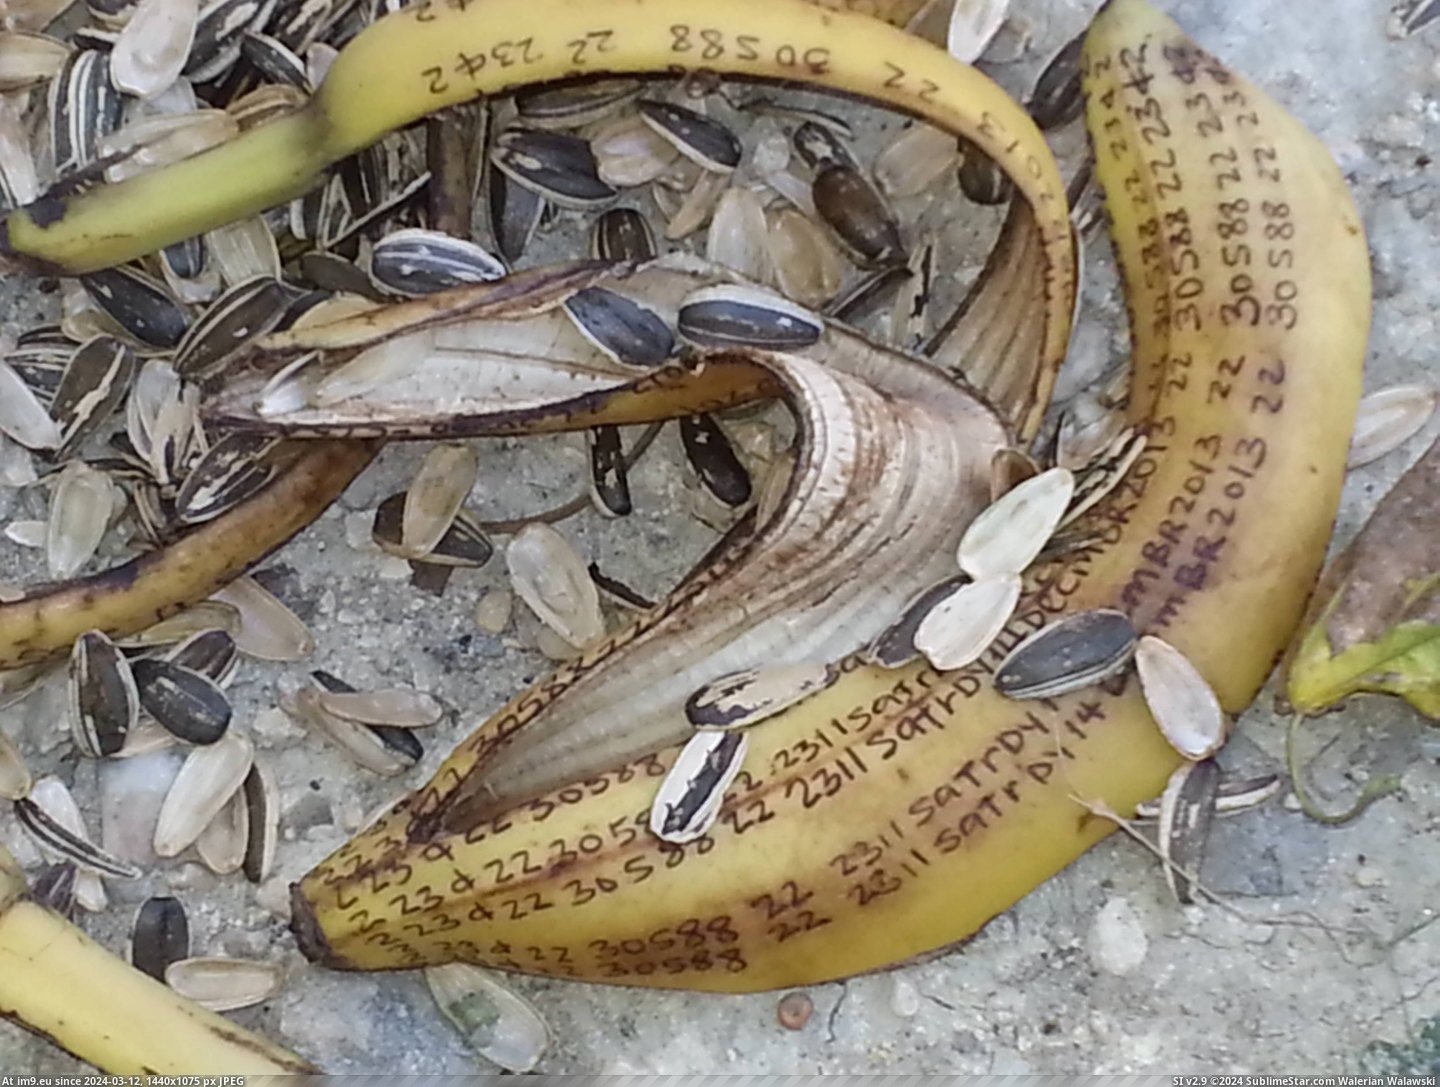 #Wtf #Job #Parking #Peel #Lot #Banana [Wtf] Found a banana peel in the parking lot at my job.....I think its trying to tell me something. ... Pic. (Изображение из альбом My r/WTF favs))